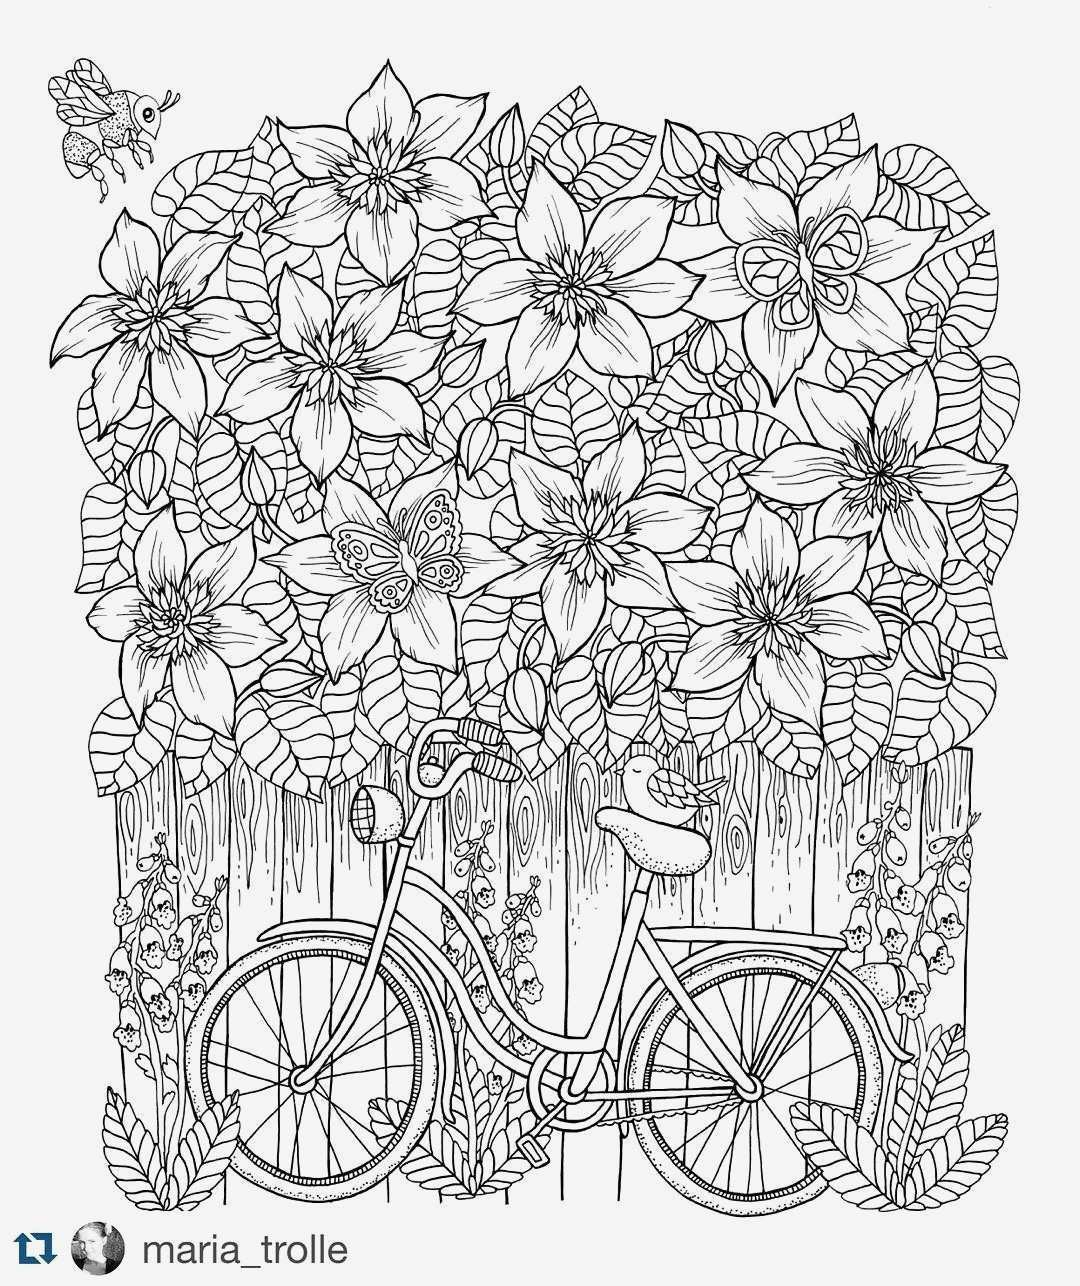 Spanish Christmas Coloring Pages Henna Design Coloring Pages New Easy Adult Coloring Pages Free